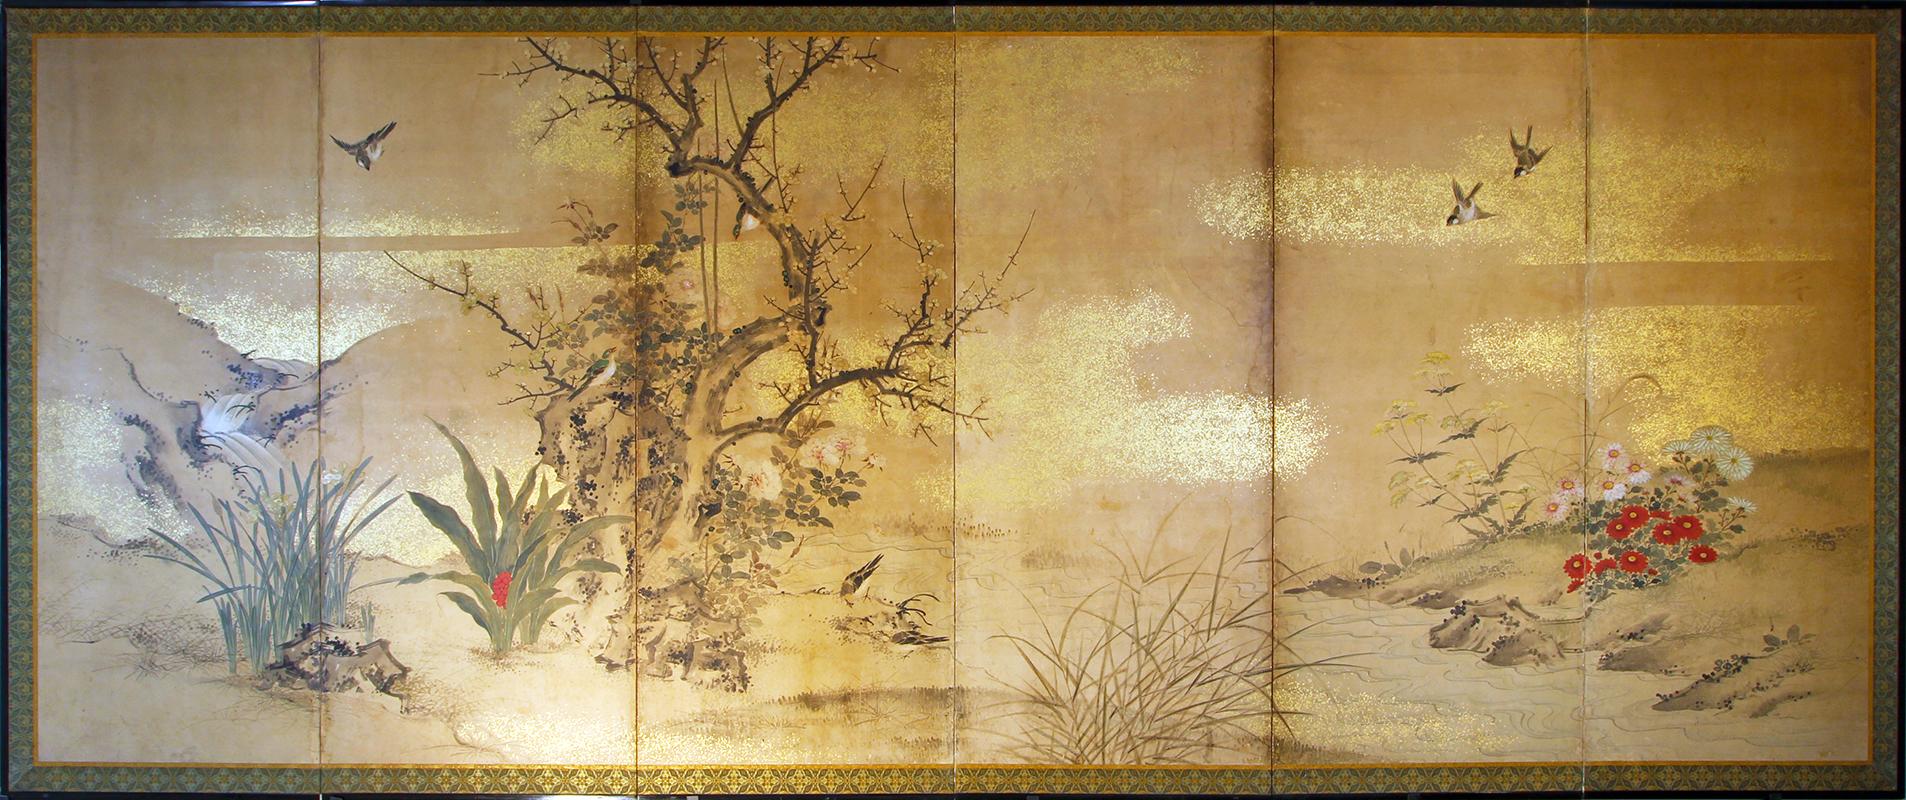 Landscape with birds, blooming sakura trees and chrysanthemum plants.
Six-panel Japanese folding screen with gold grains and hand painted with mineral pigments on rice paper. Edo period, early 19th century.